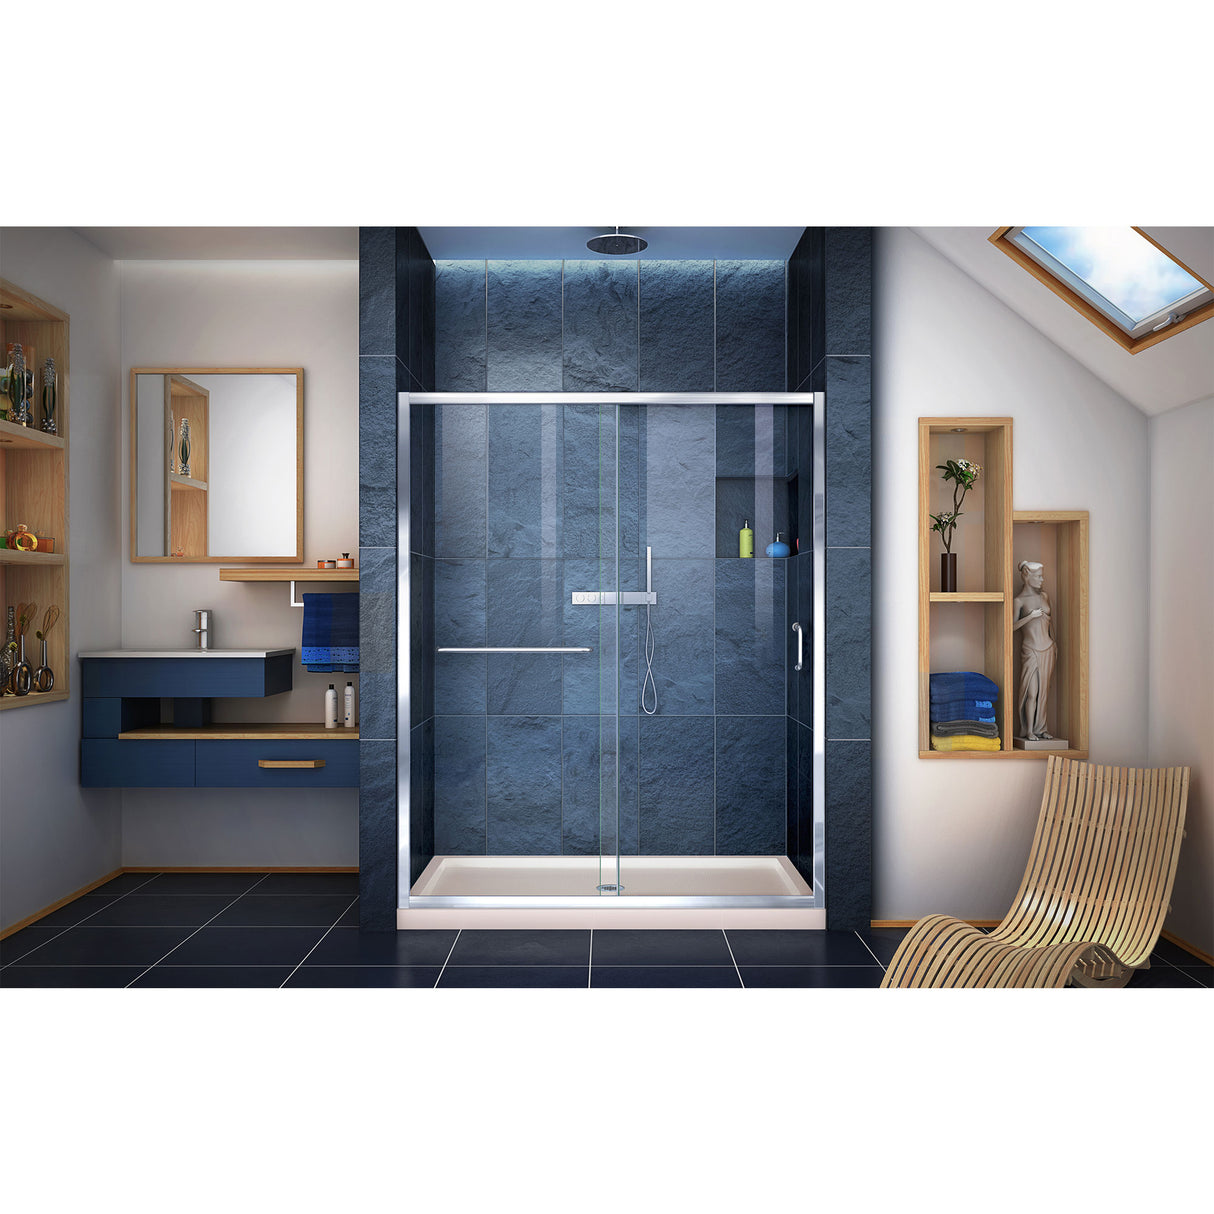 DreamLine Infinity-Z 30 in. D x 60 in. W x 74 3/4 in. H Clear Sliding Shower Door in Chrome and Center Drain Biscuit Base